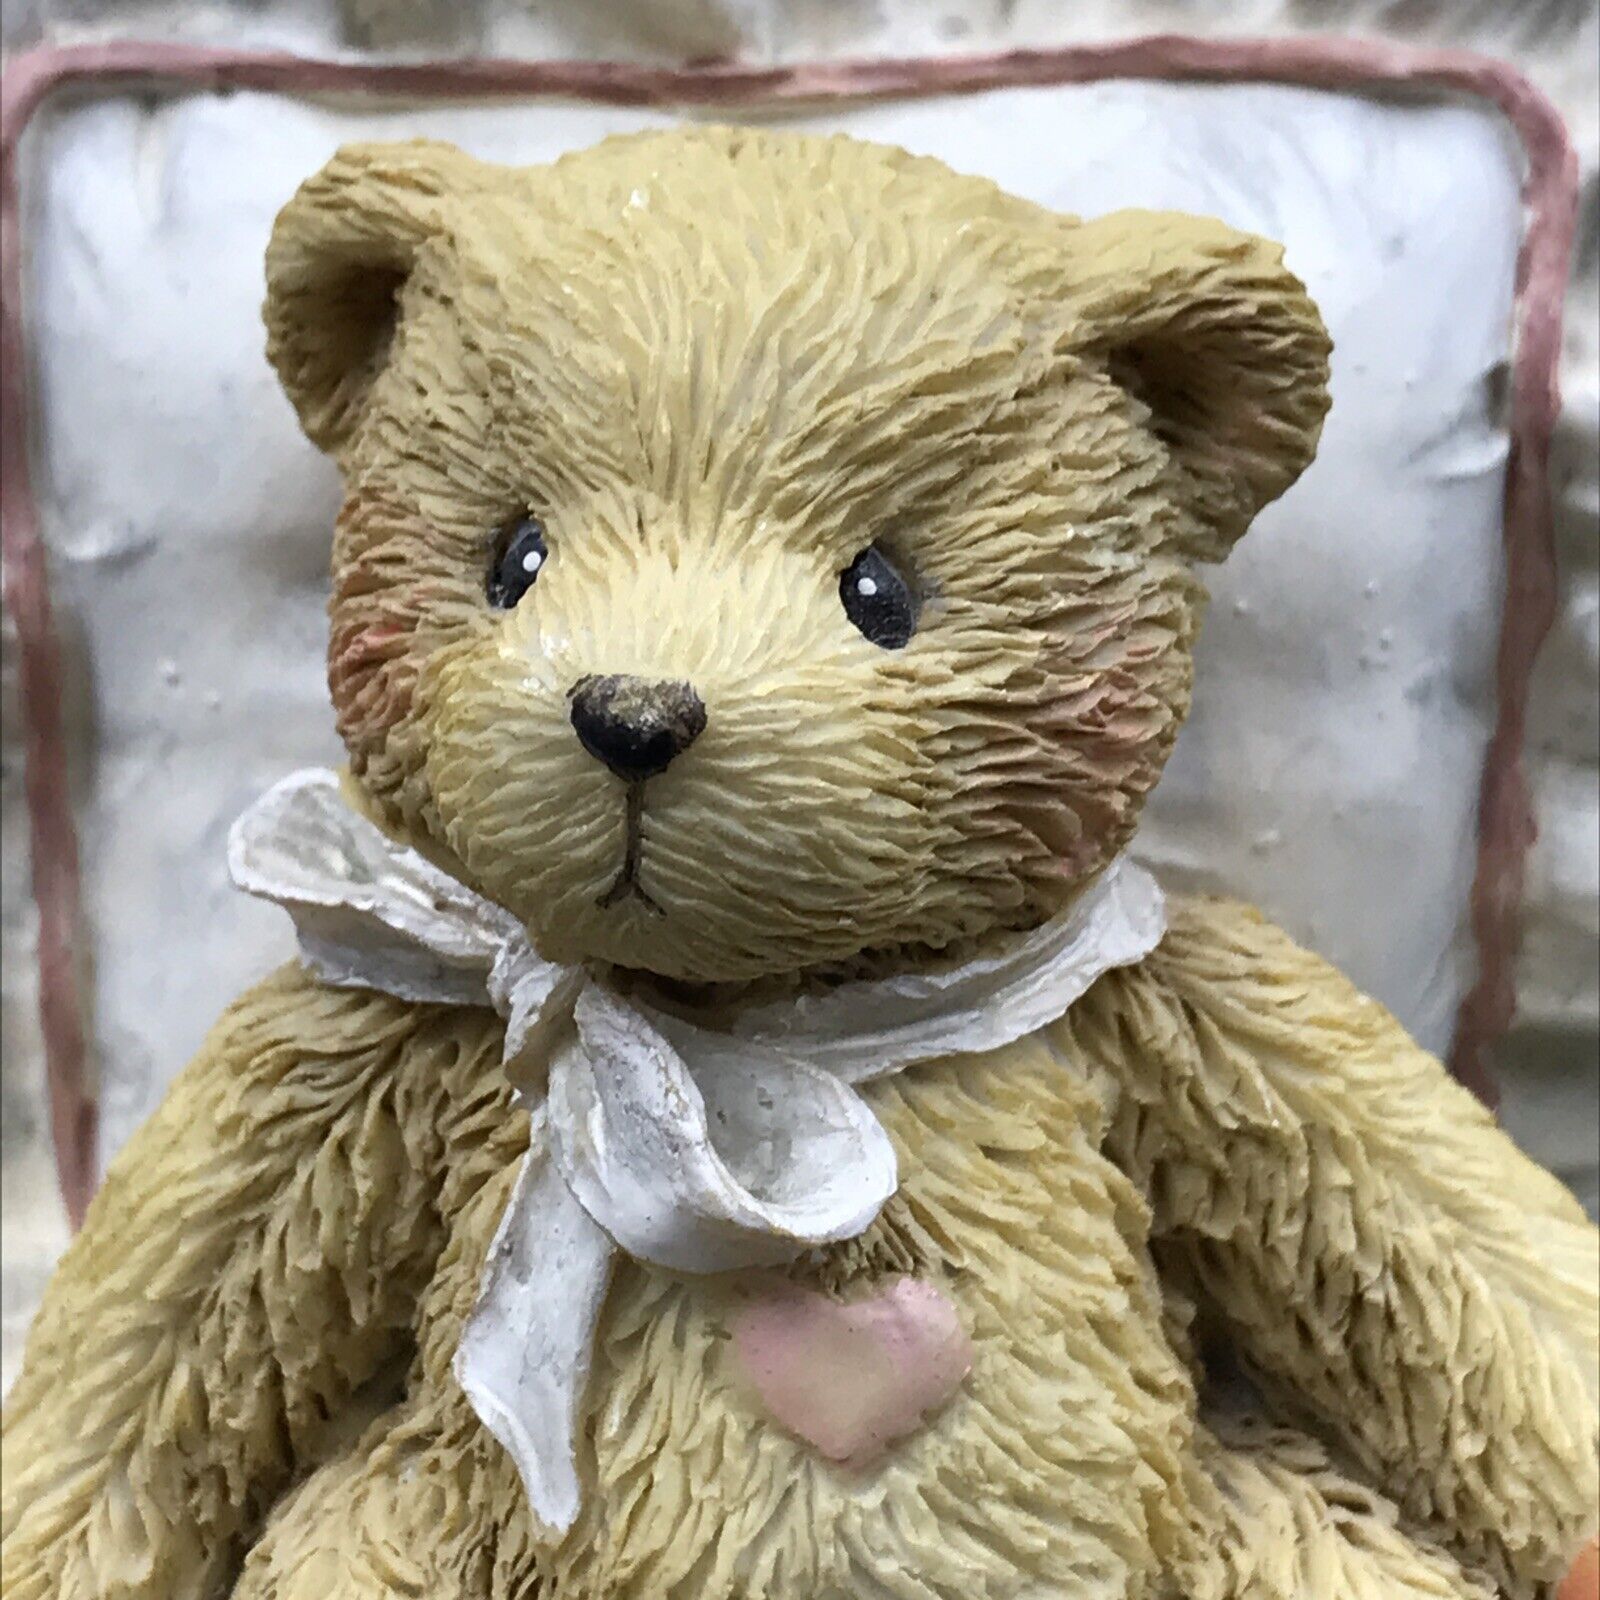 1991 Cherished Teddies Mandy I Love You Just The Way You Are Figurine 950572